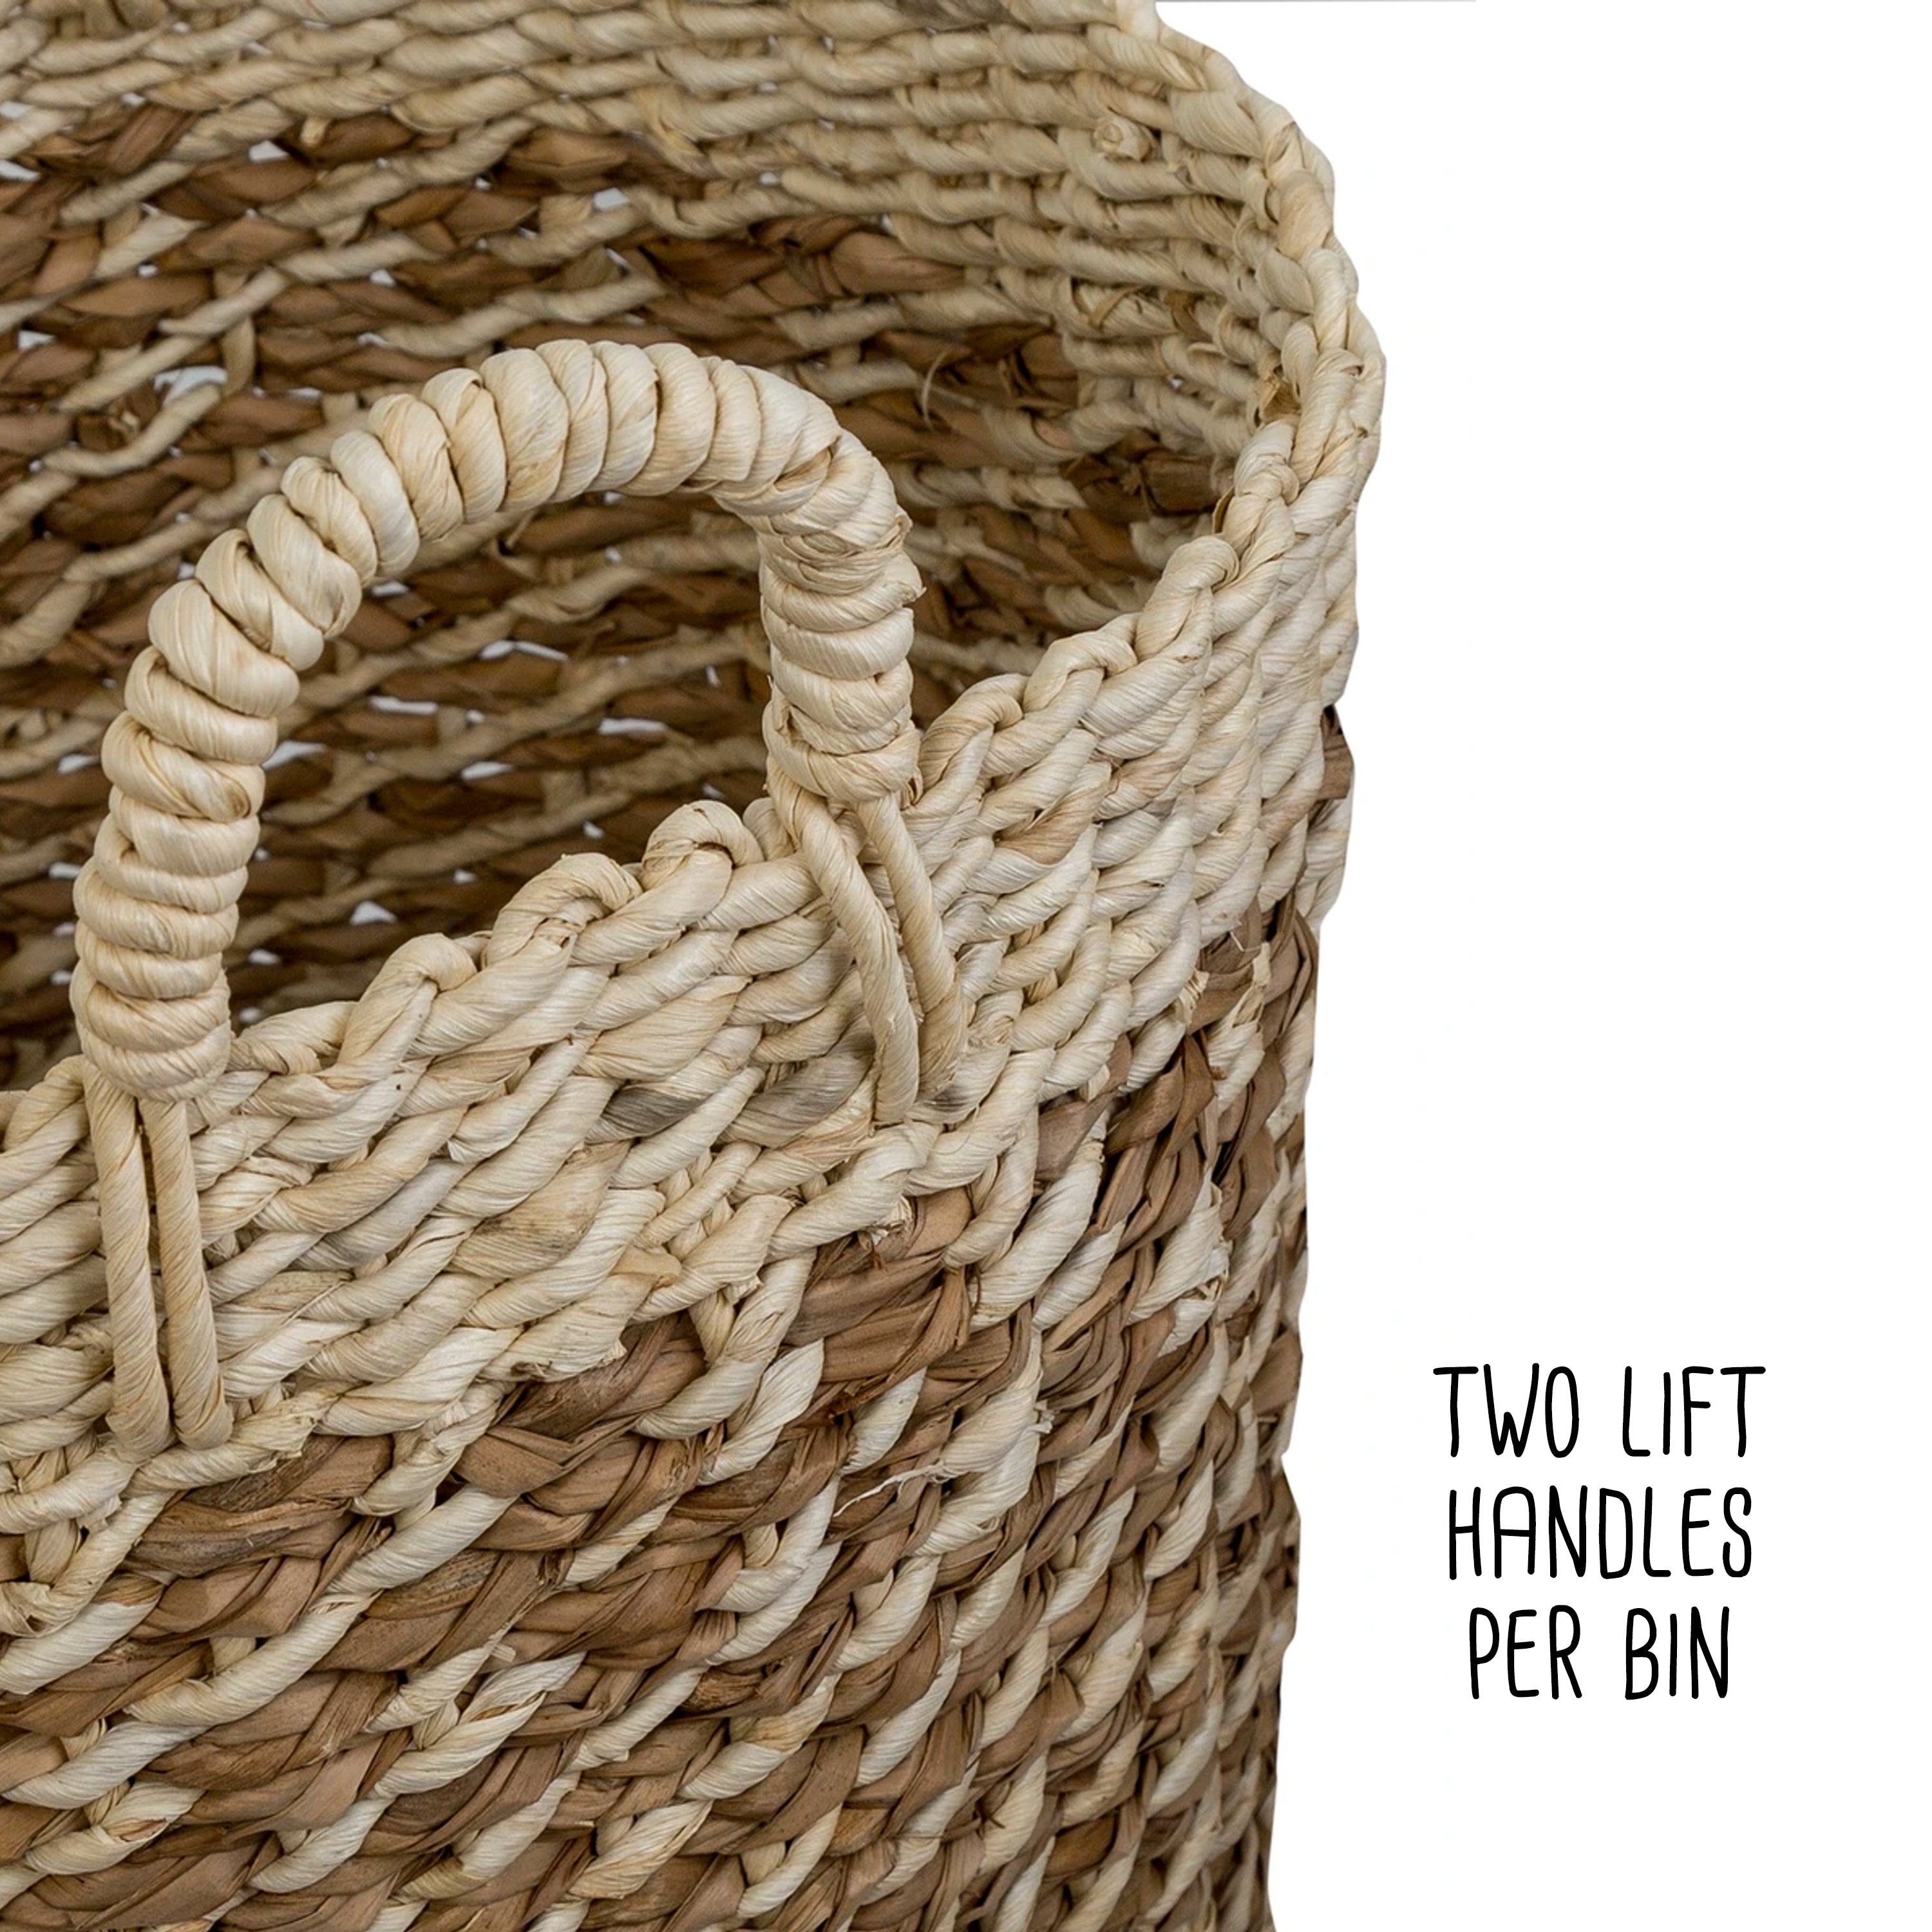 Set of 3 Small Wicker Baskets for Storage, Woven Nesting Bins with